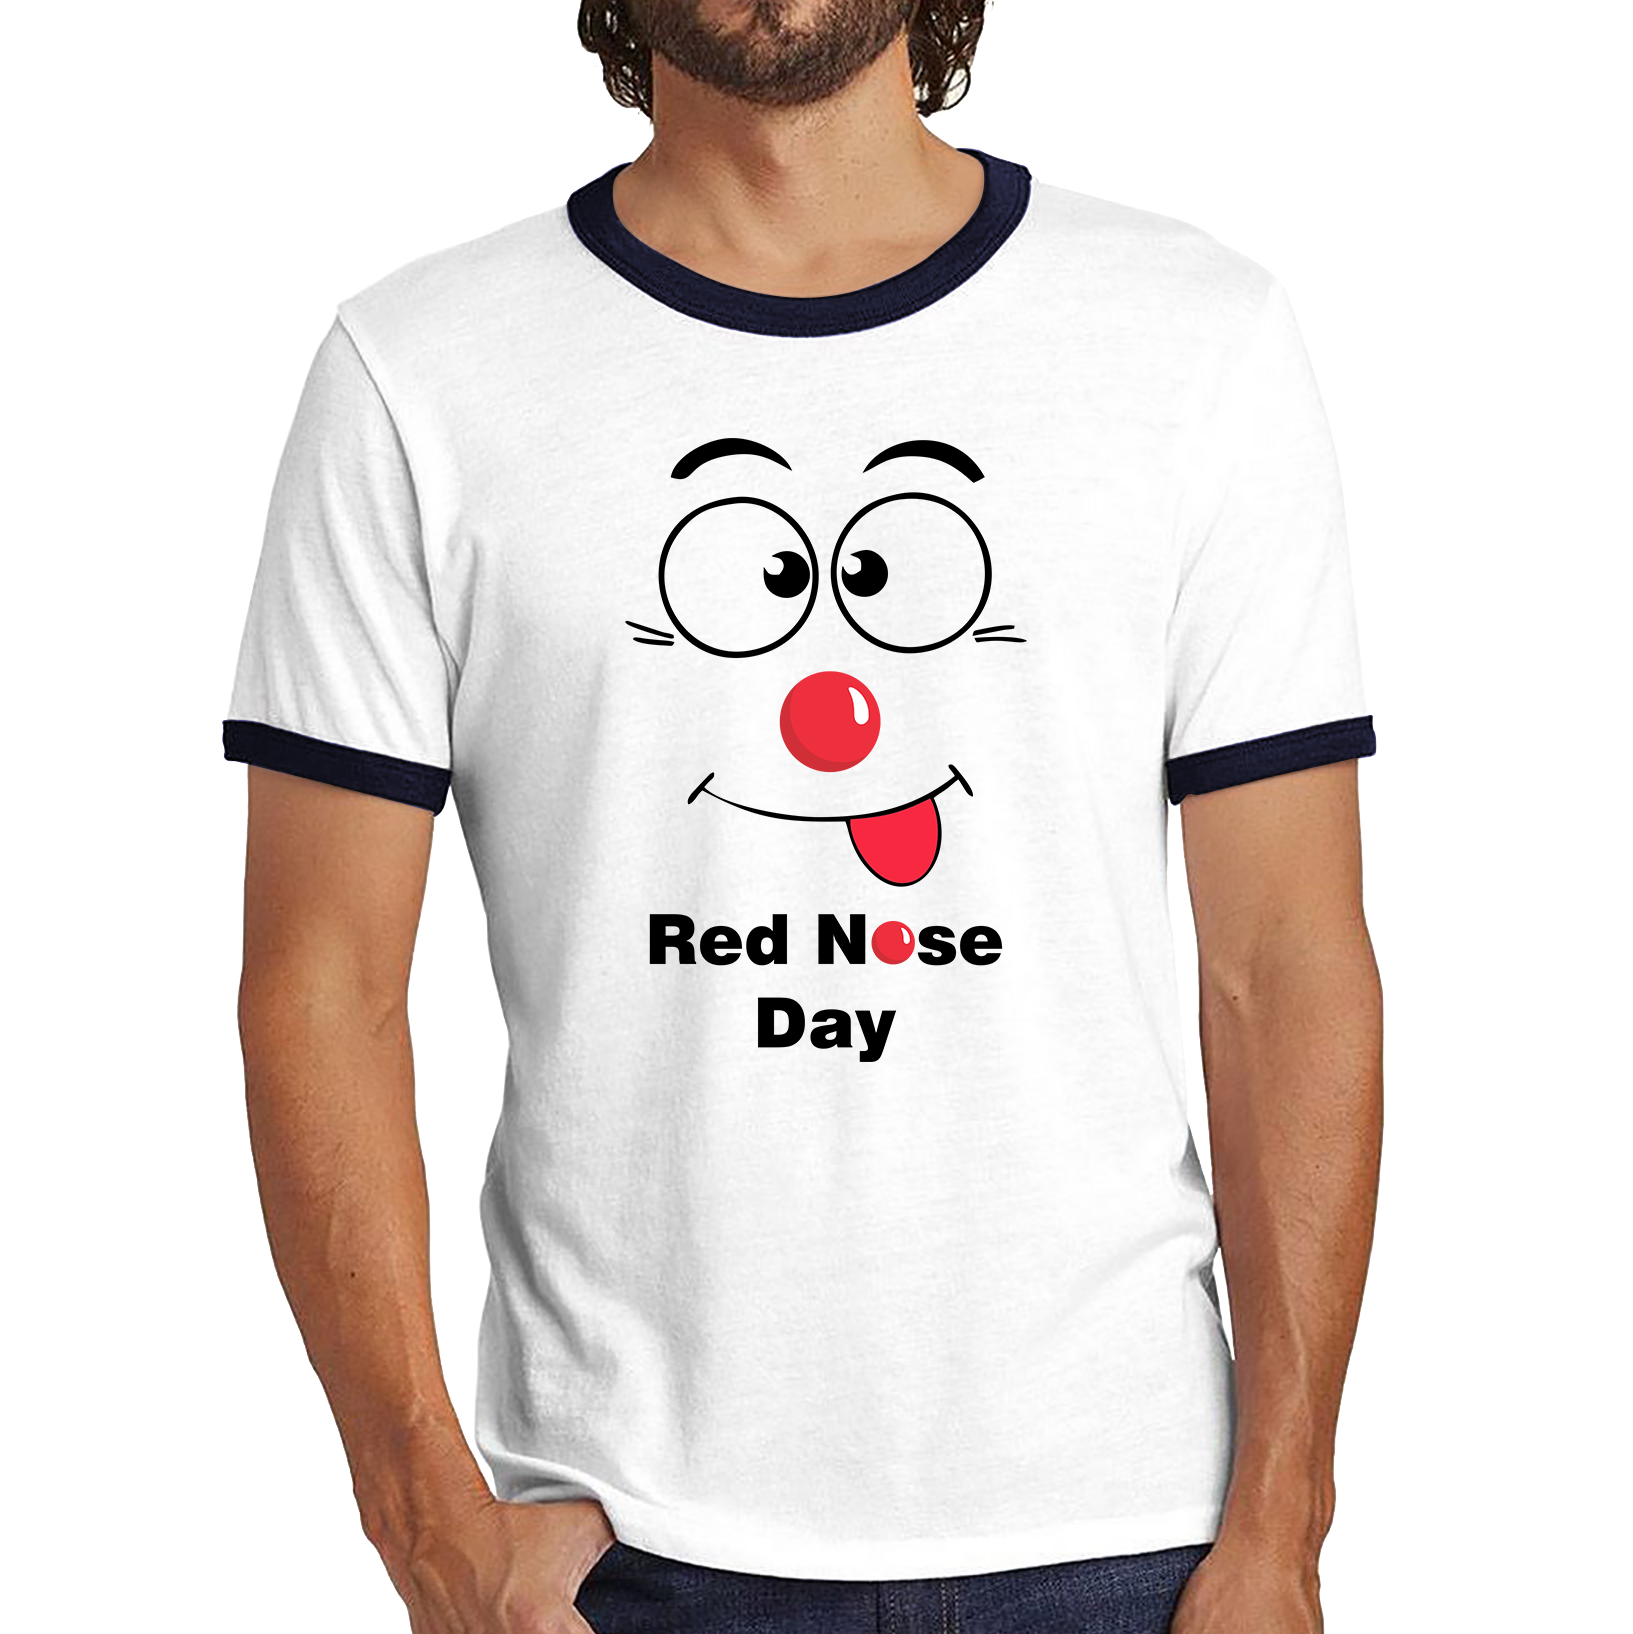 Funny Emoji Face Red Nose Day Ringer T Shirt. 50% Goes To Charity